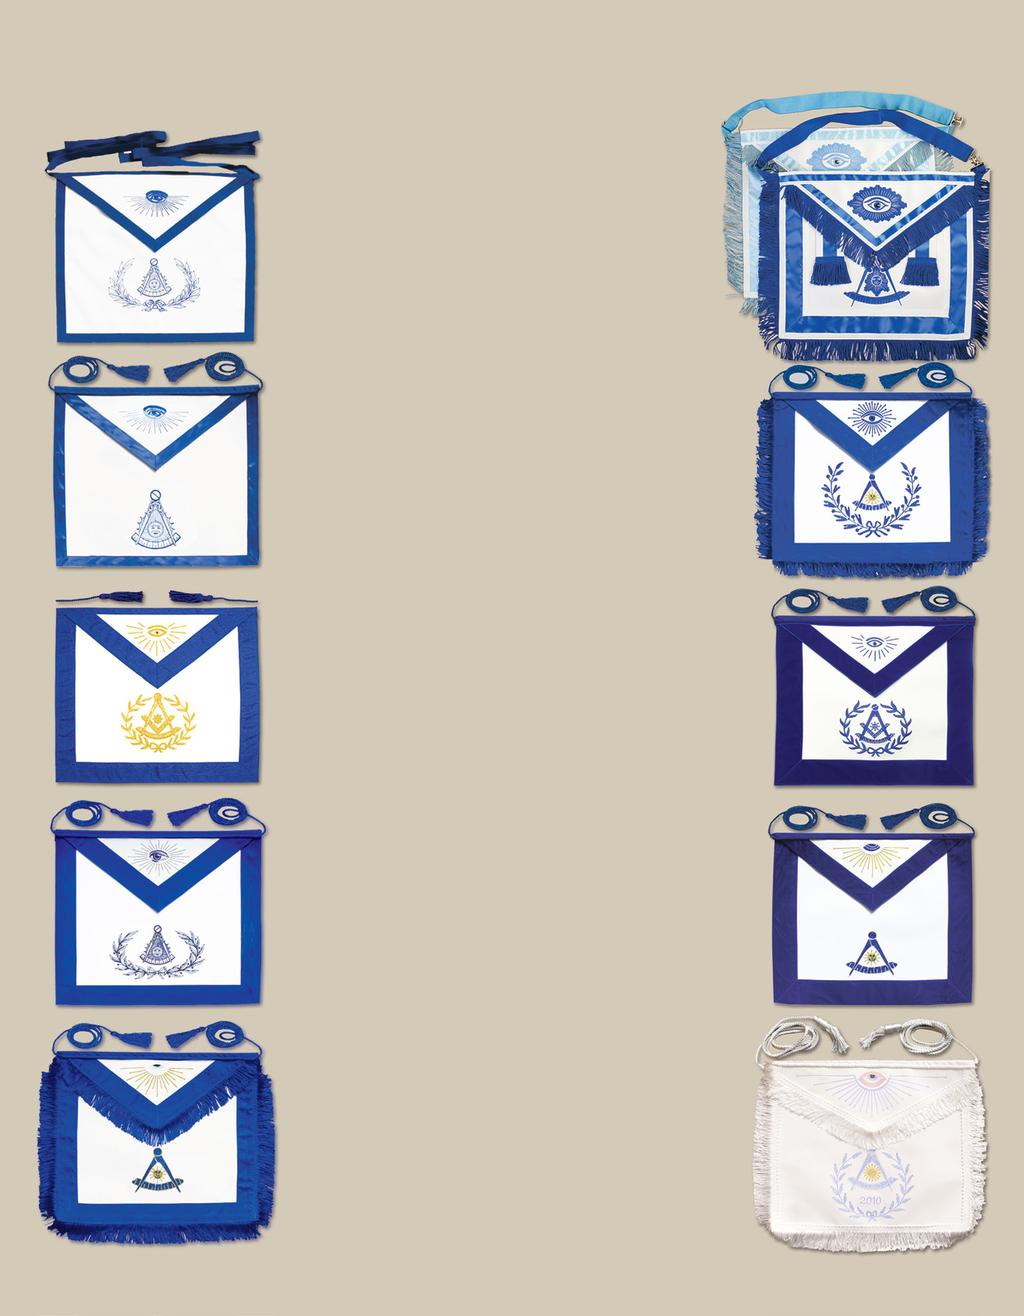 PAST MASTER AND OFFICER APRONS All JP Luther Aprons Are Made in the USA Available for all jurisdictions. Call for a quote. A. Past Master -Double layer poly cotton, 13 x 15 -Shrink and stain resistant -Royal blue woven braid borders & ties -All Seeing Eye printed on flap -Emblem and wreath printed on body No.